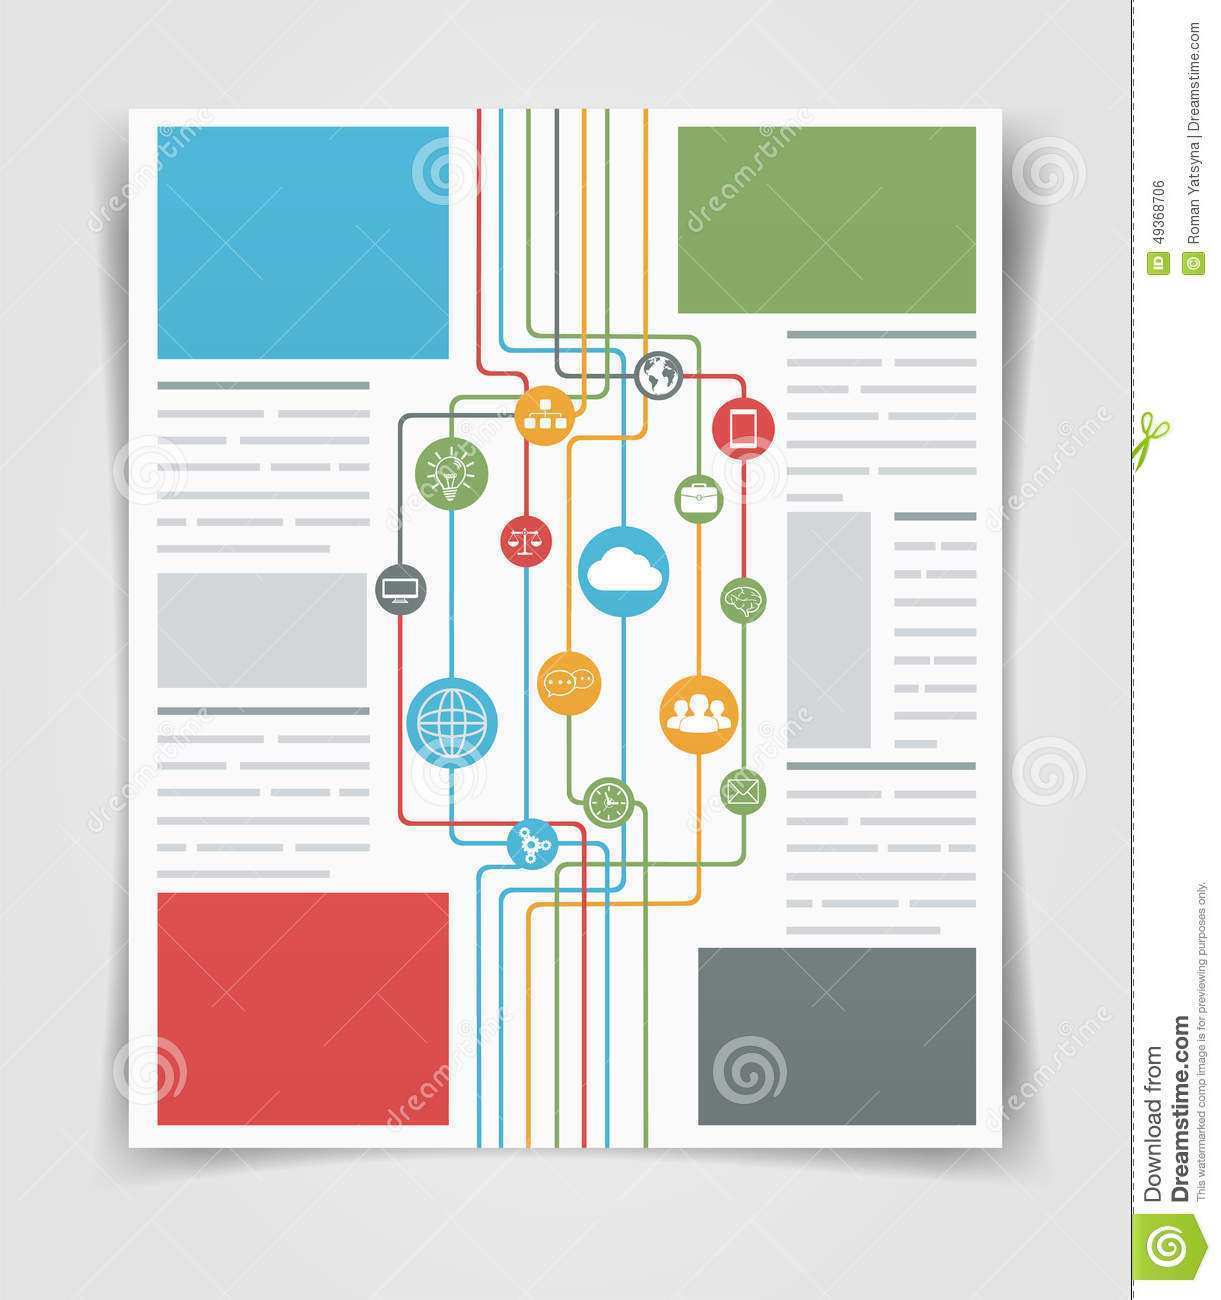 72 Customize Our Free Information Flyer Template PSD File for Information Flyer Template